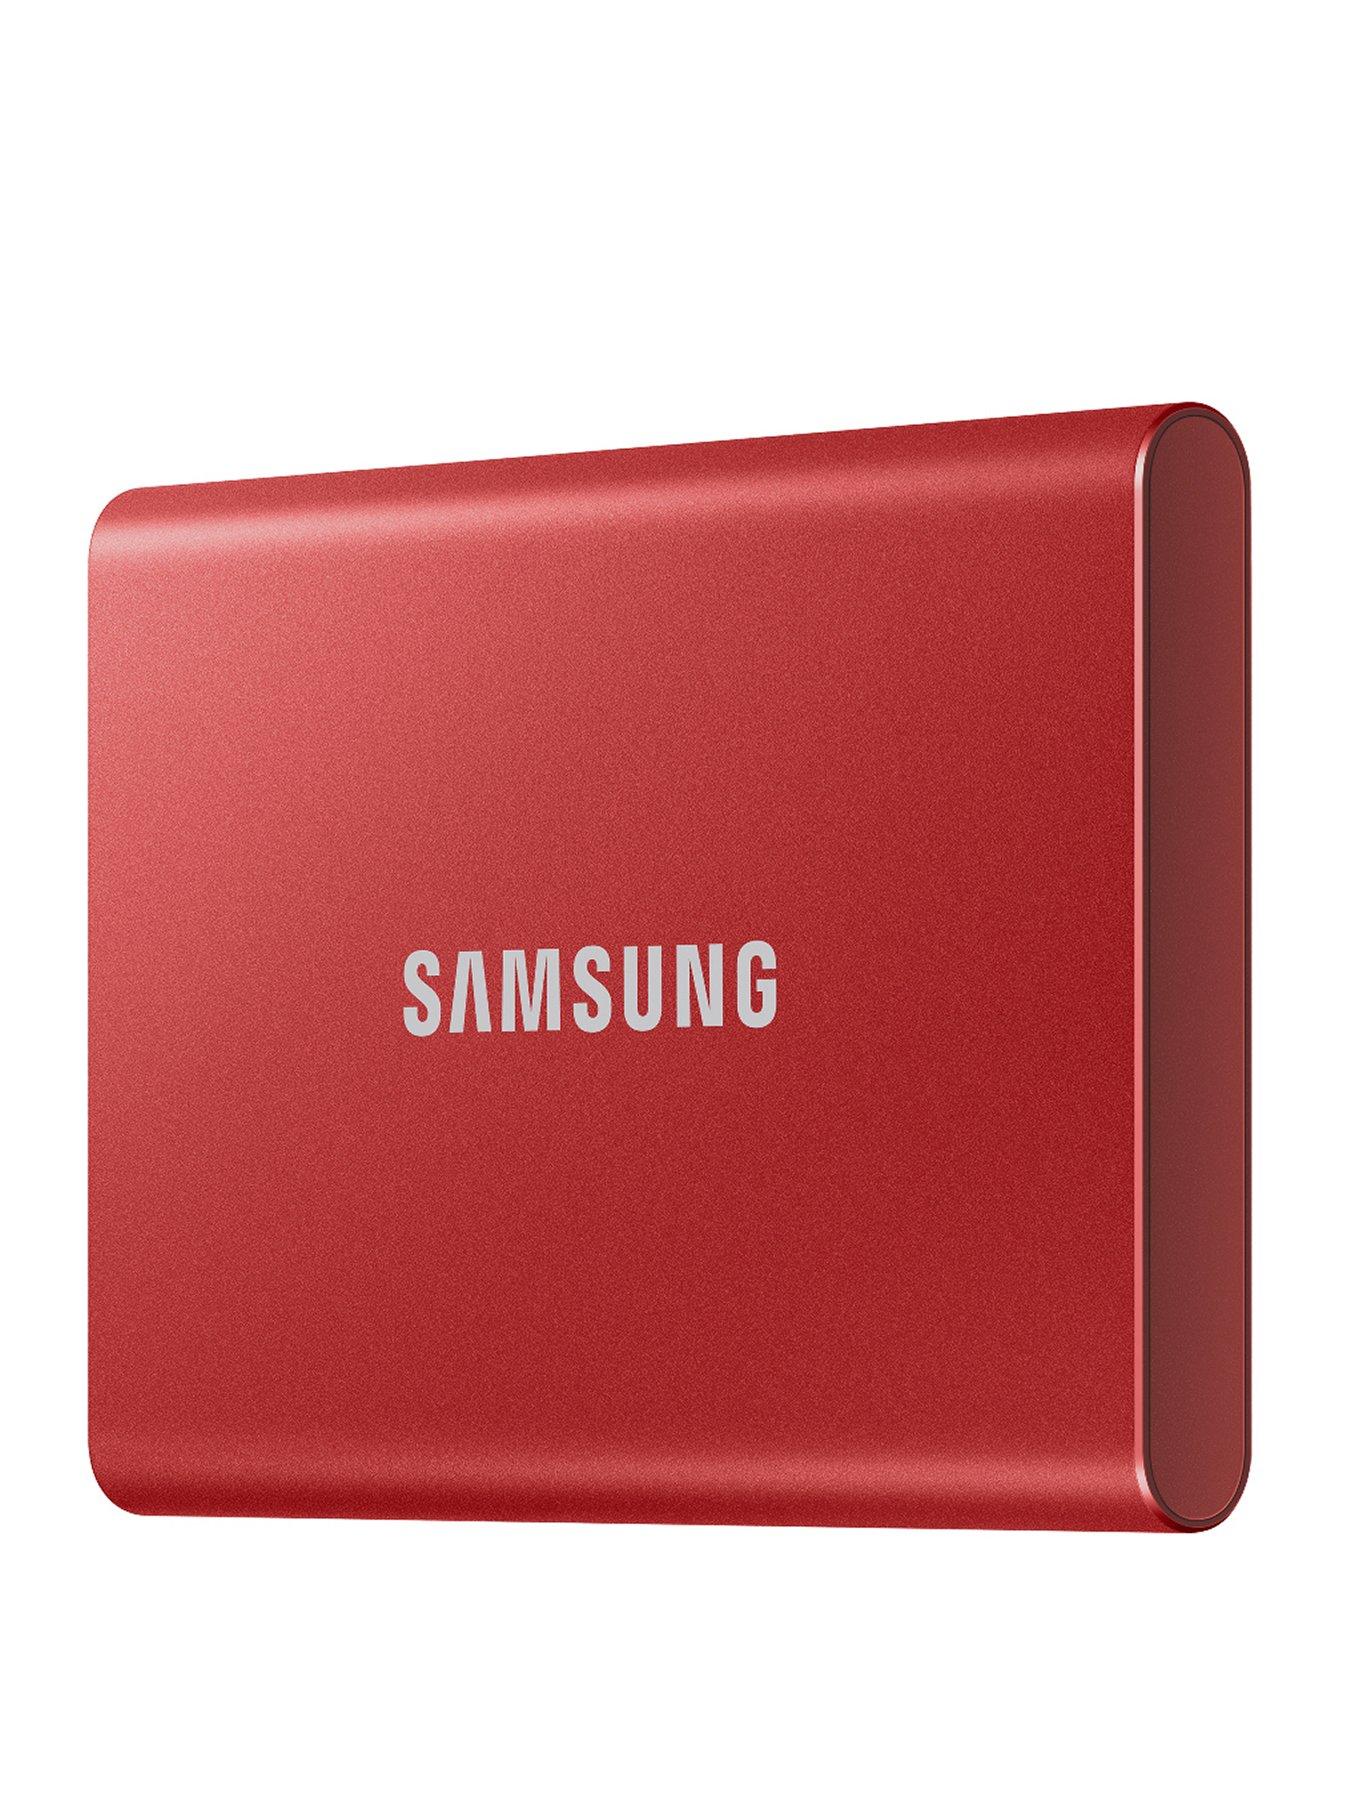 Installing Samsung T7 2TB External Portable Drive in PS5 